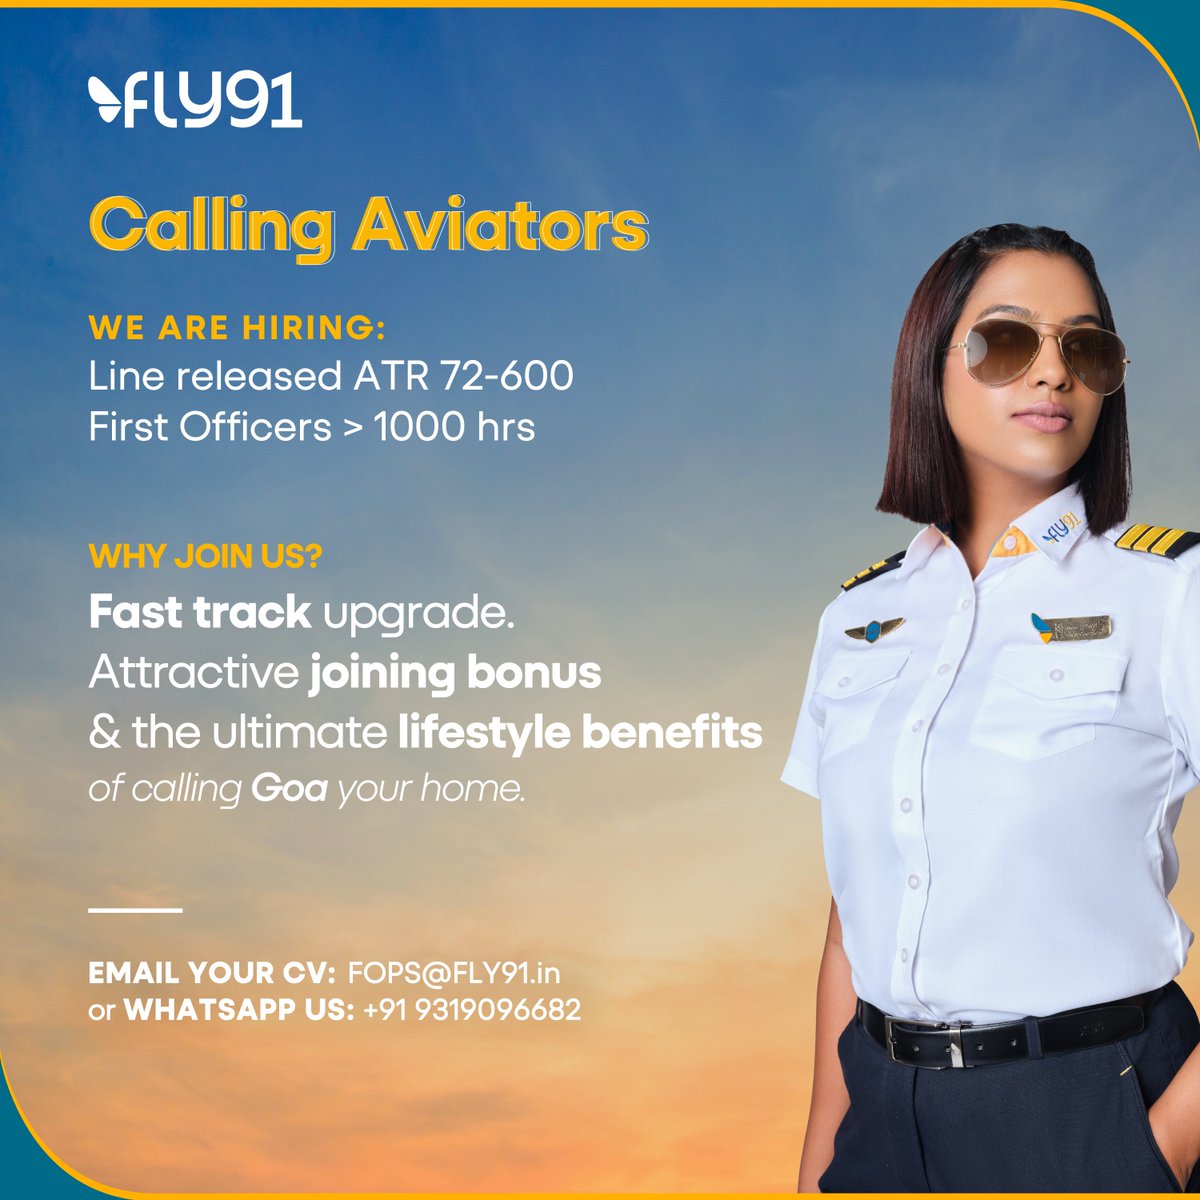 Hello Aviators, we are looking for Line Released ATR 72-600 First Officers to join our family. Come navigate the skies of Bharat with us 🇮🇳✈️ Email your CV to fops@fly91.in or WhatsApp your details to +91 9319096682 #BharatUnbound #Hiring #Career #Pilot #Airline #India #Bharat